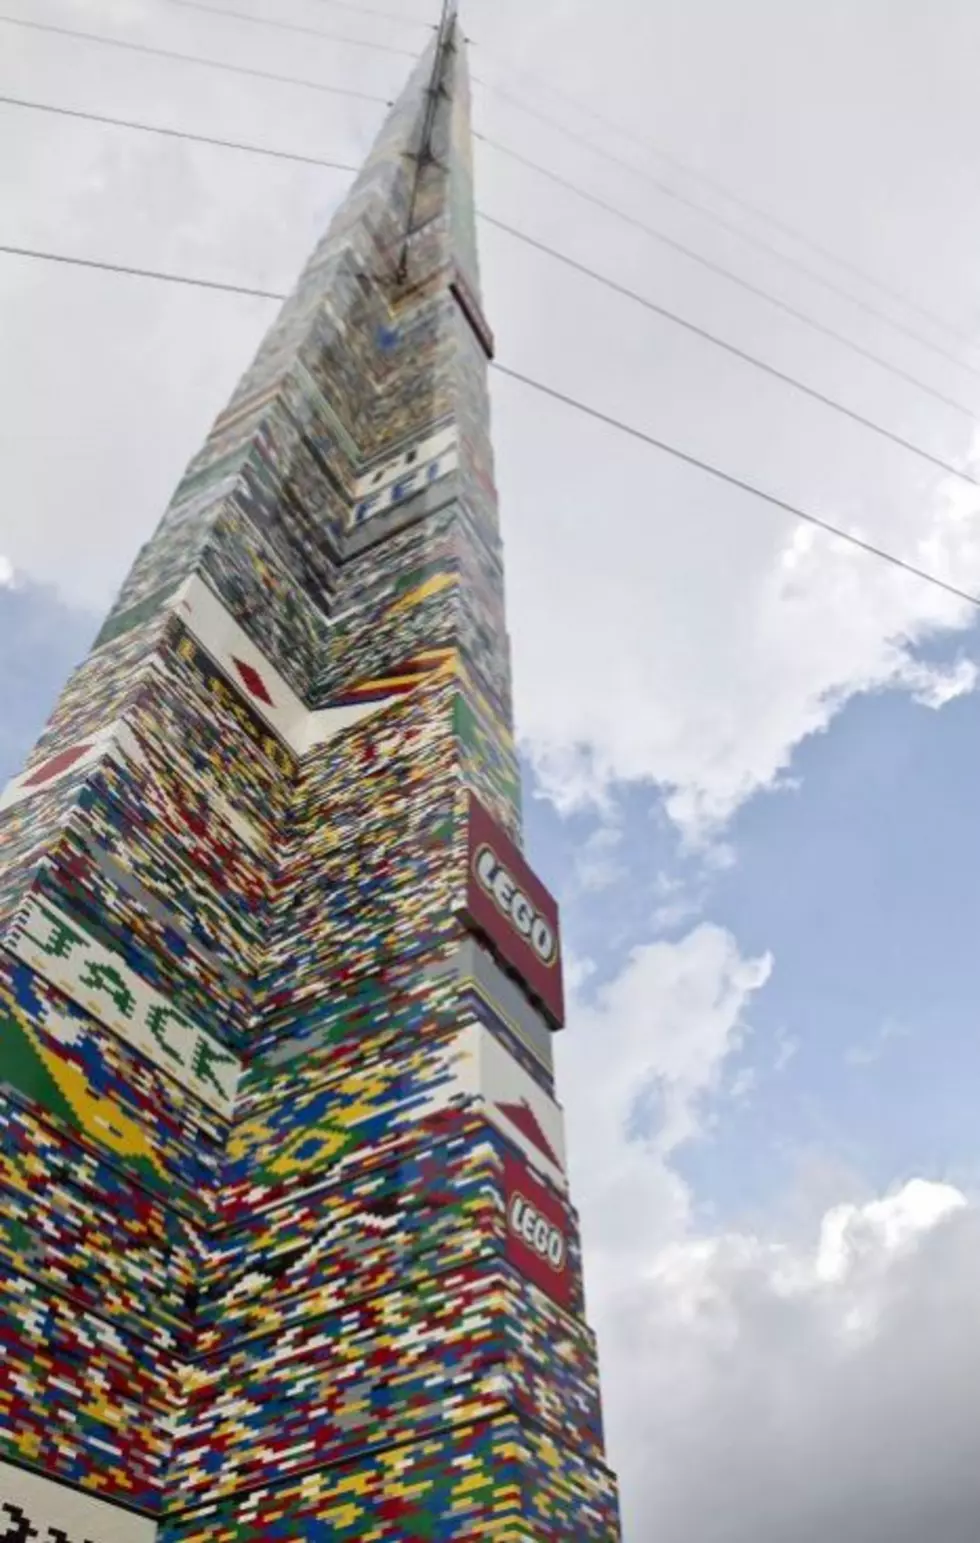 The Tower Of Lego [VIDEO]